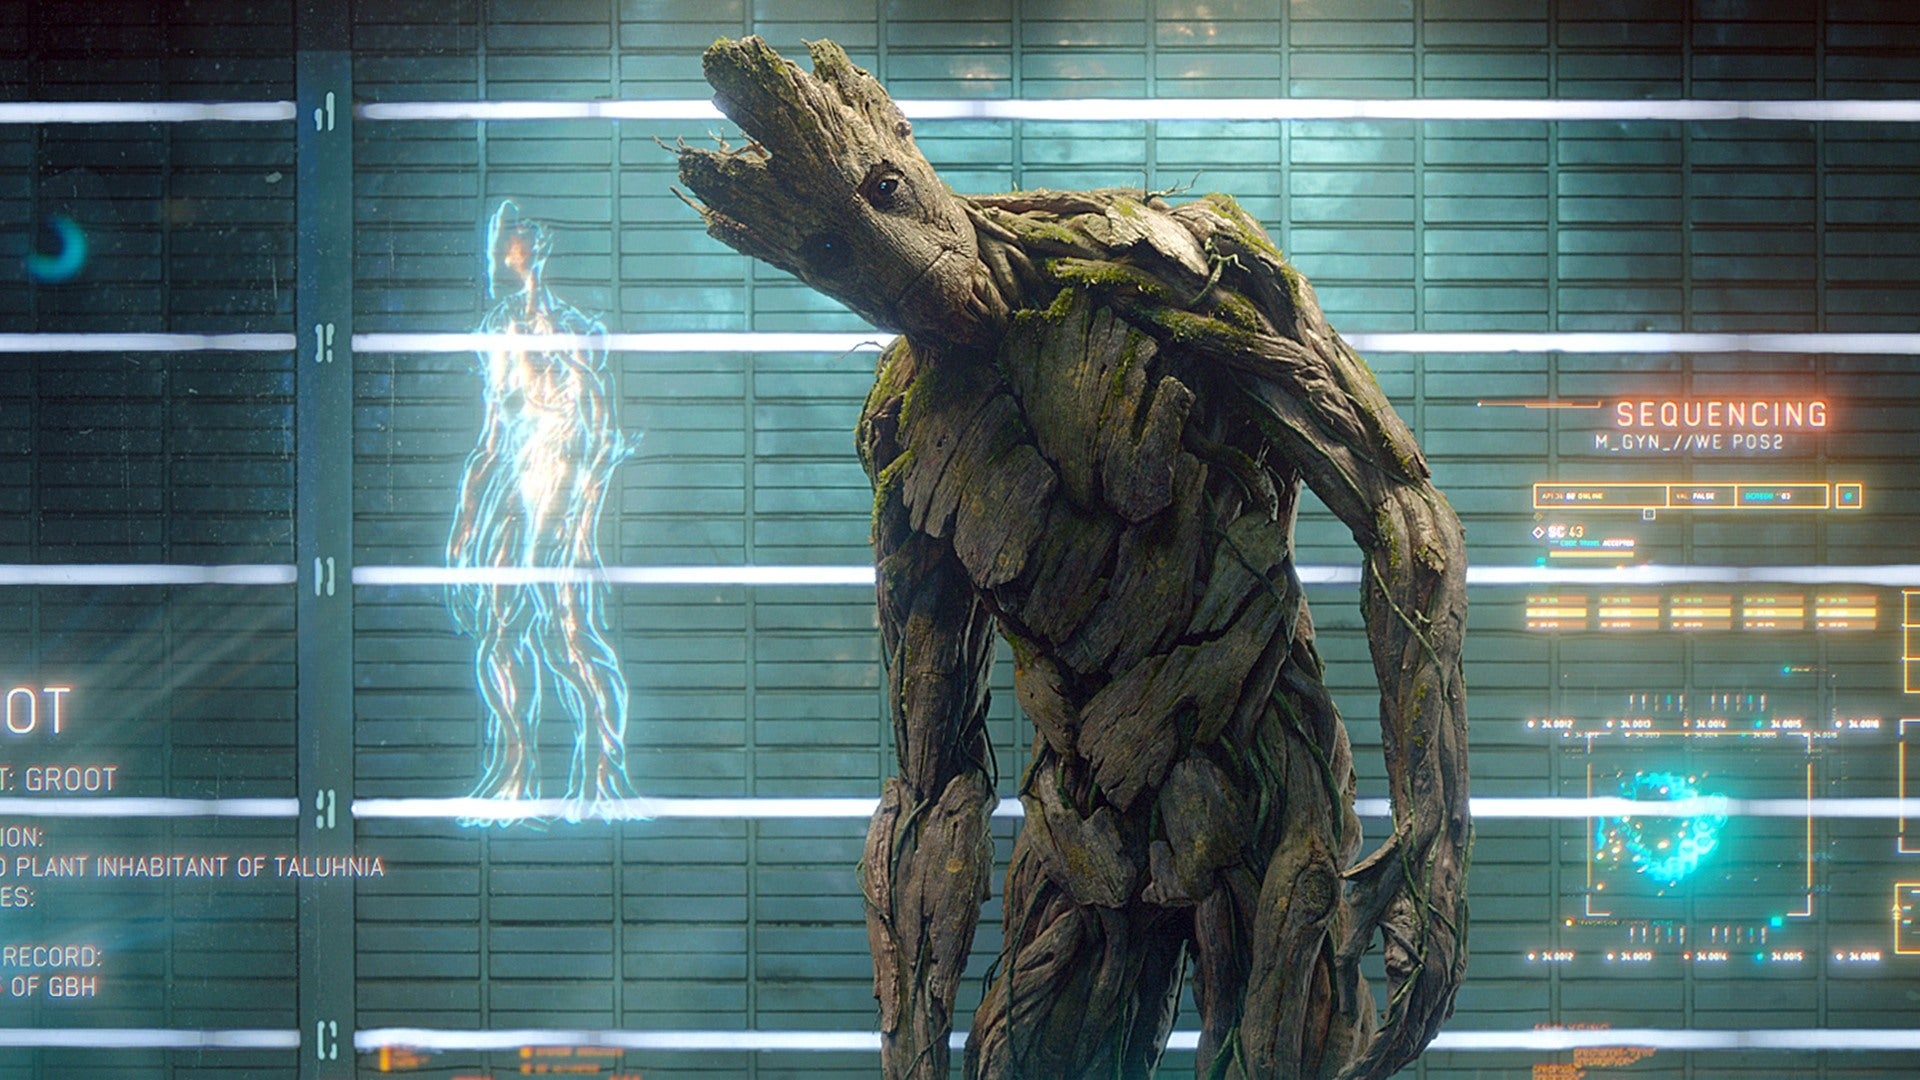 Guardians of the Galaxy, Baby Groot, Marvel Cinematic Universe, Anniversary tribute, 1920x1080 Full HD Desktop